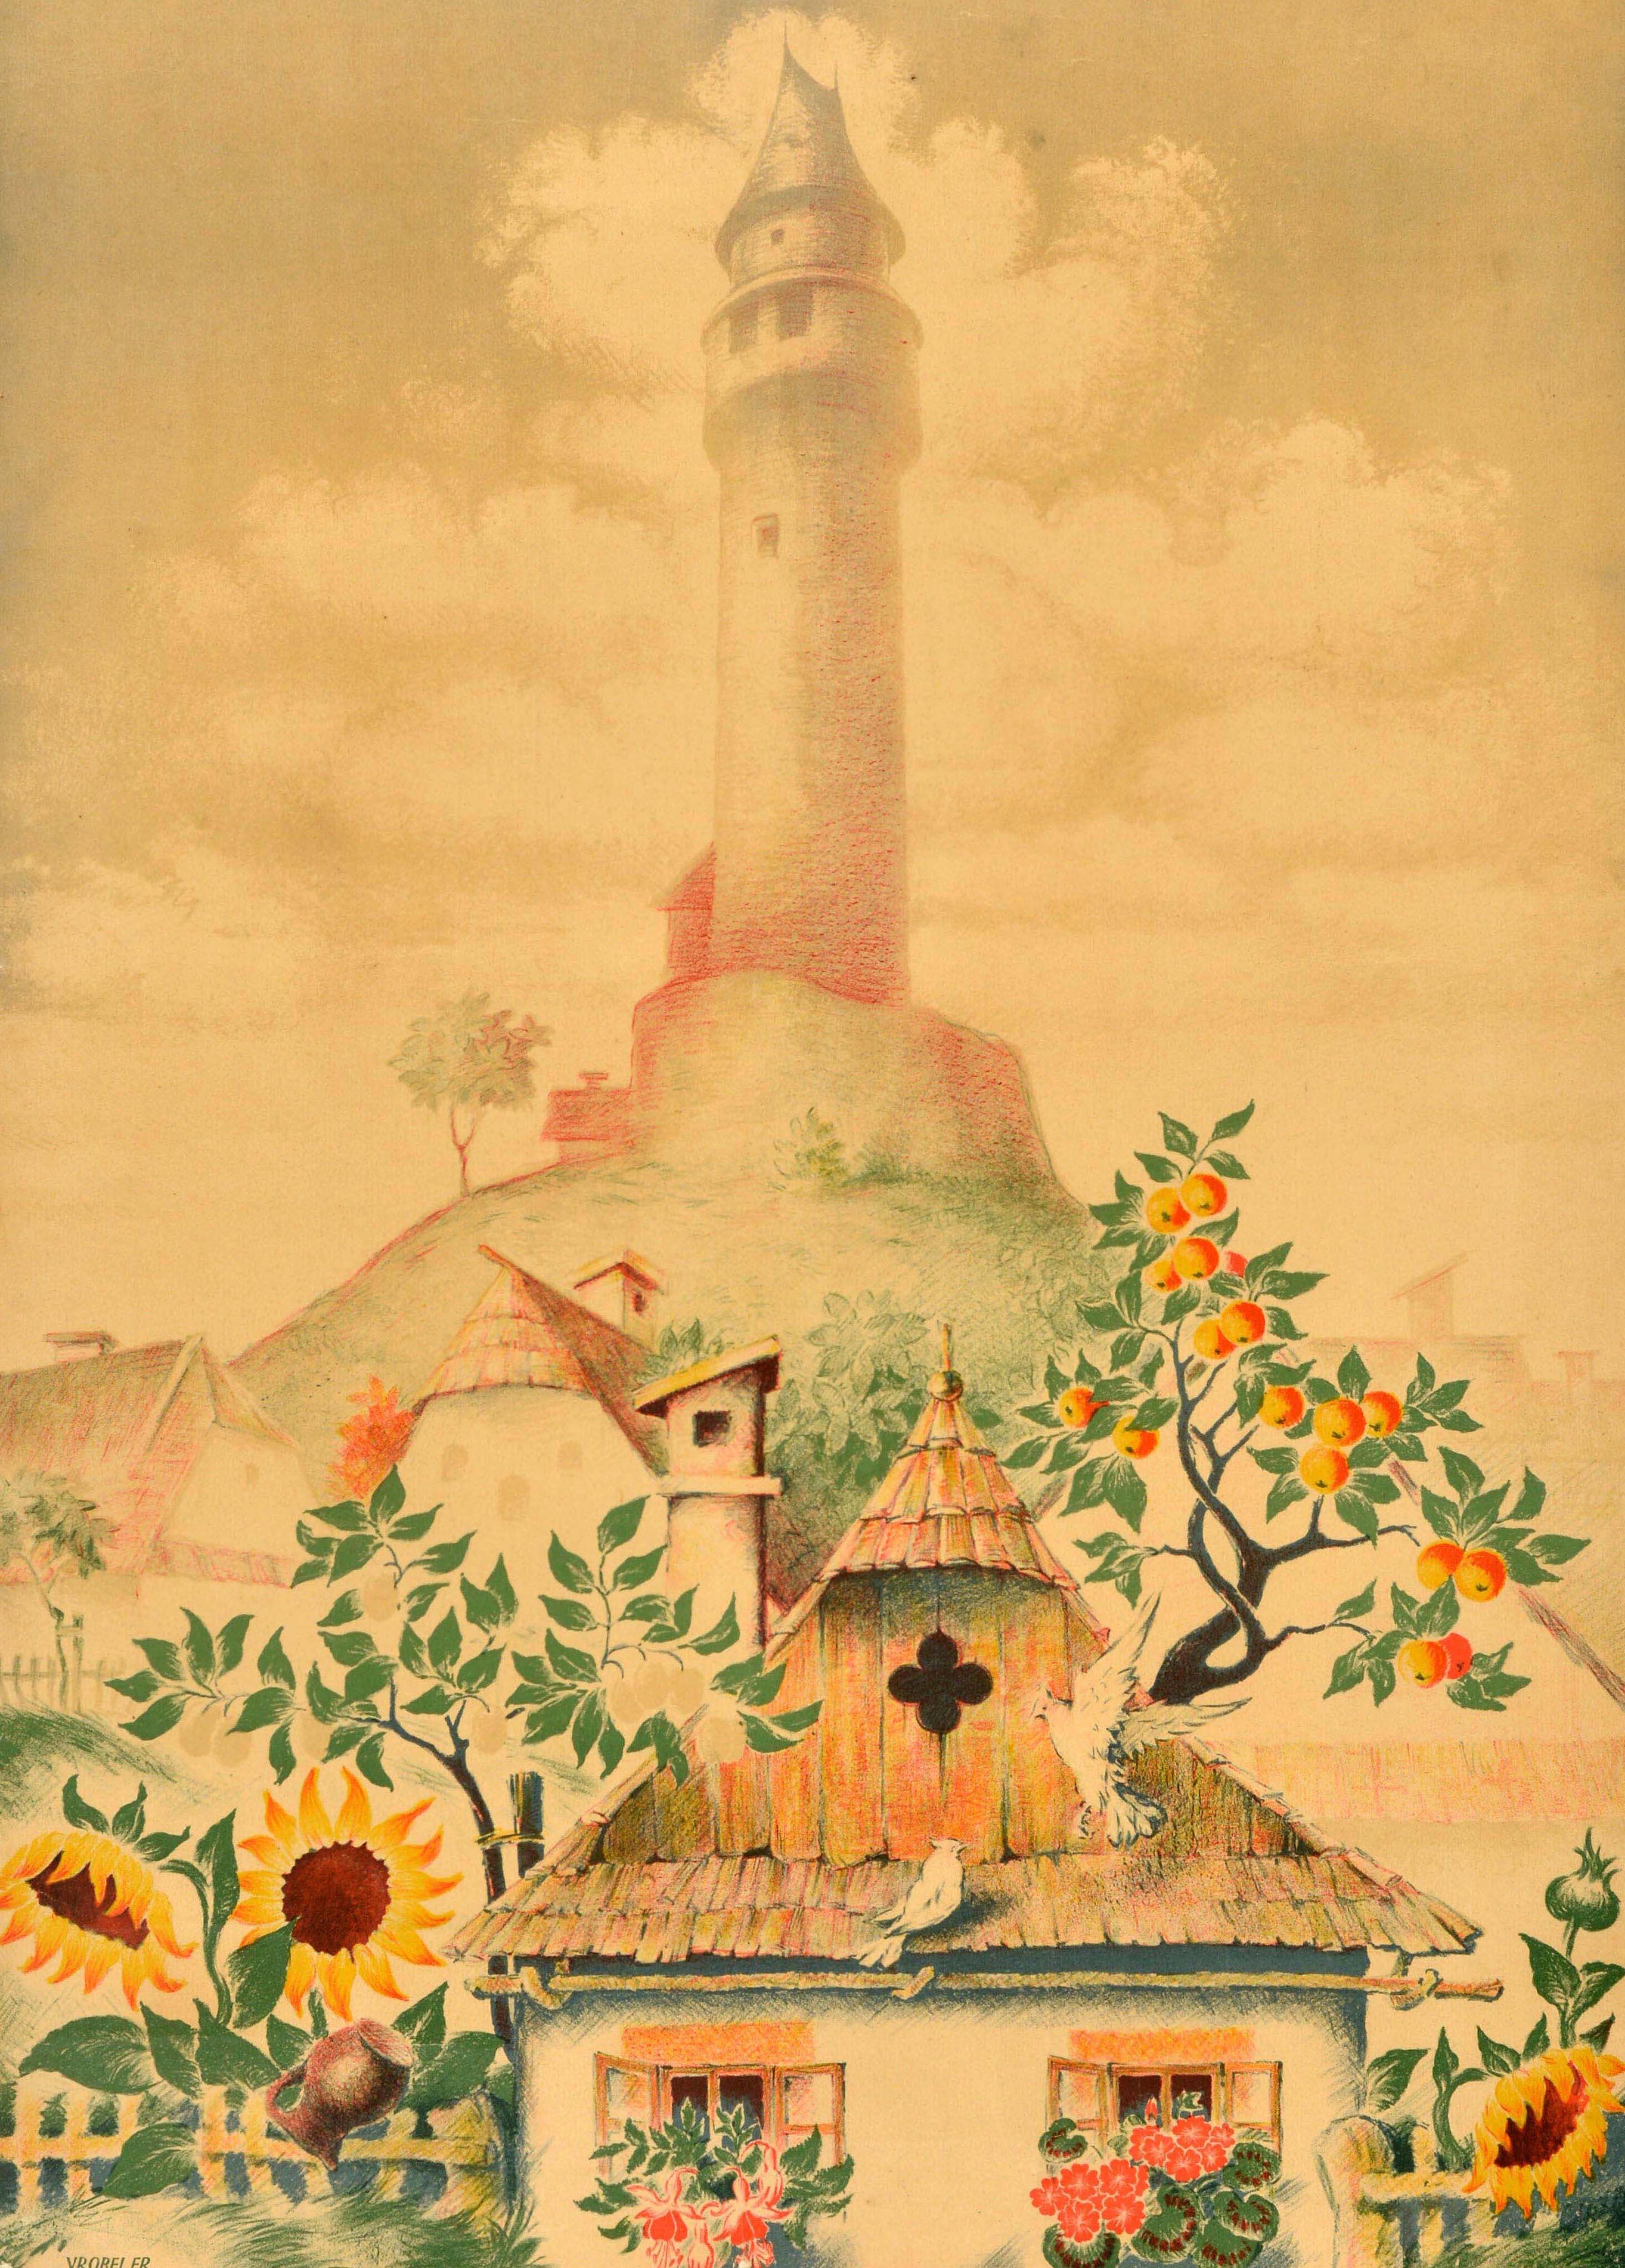 Original vintage train travel advertising poster for Stramberk Chemins de Fer de l'Etat Tchccoslovaque / Czechoslovak State Railways featuring a scenic illustration of a quaint village house with flowers on the window sills, sunflowers in the garden